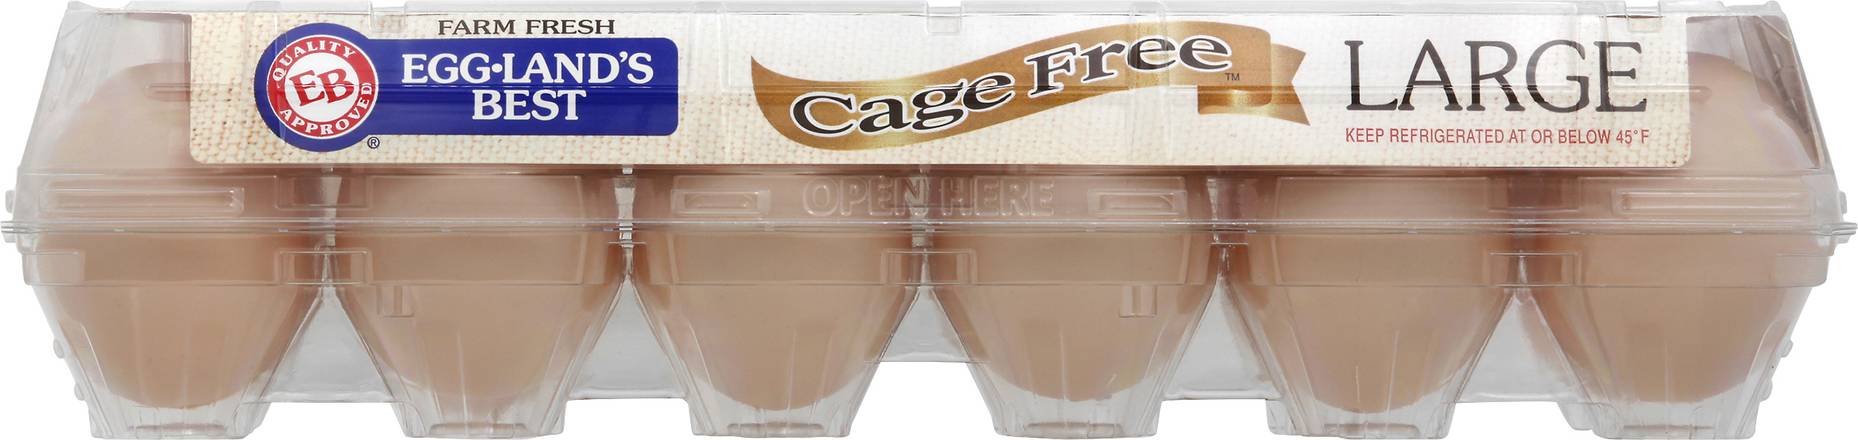 Eggland's Best Cage Free Large Brown Eggs (12 ct)